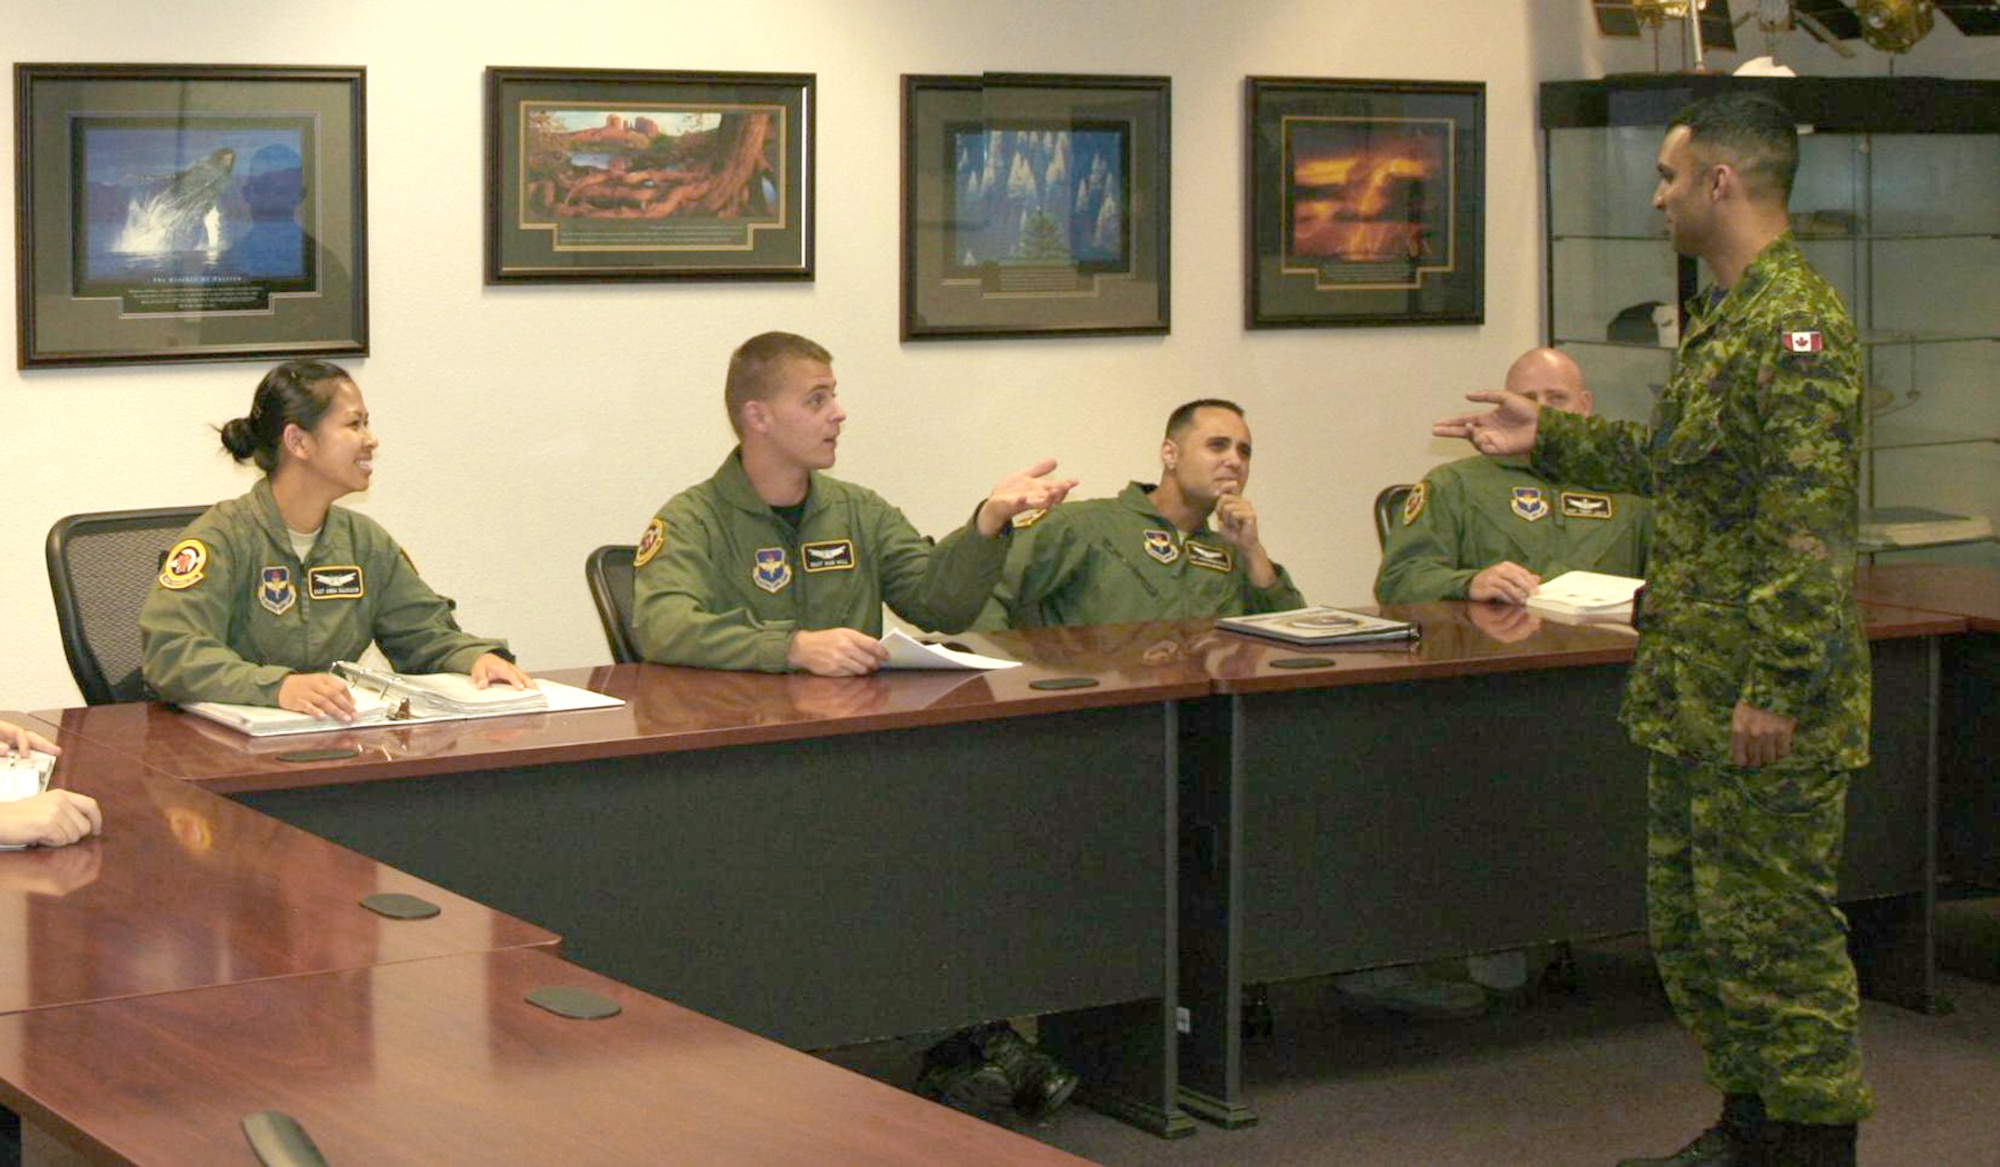 Canadian air force Sergeant David Panth teaches a class at the 533rd Training Squadron at Vandenberg Air Force Base, Calif. Canadians have been a part of the North American Aerospace Defense Command from its beginning, and seven Canadians currently fill various positions at Vandenberg AFB. (Courtesy photo)